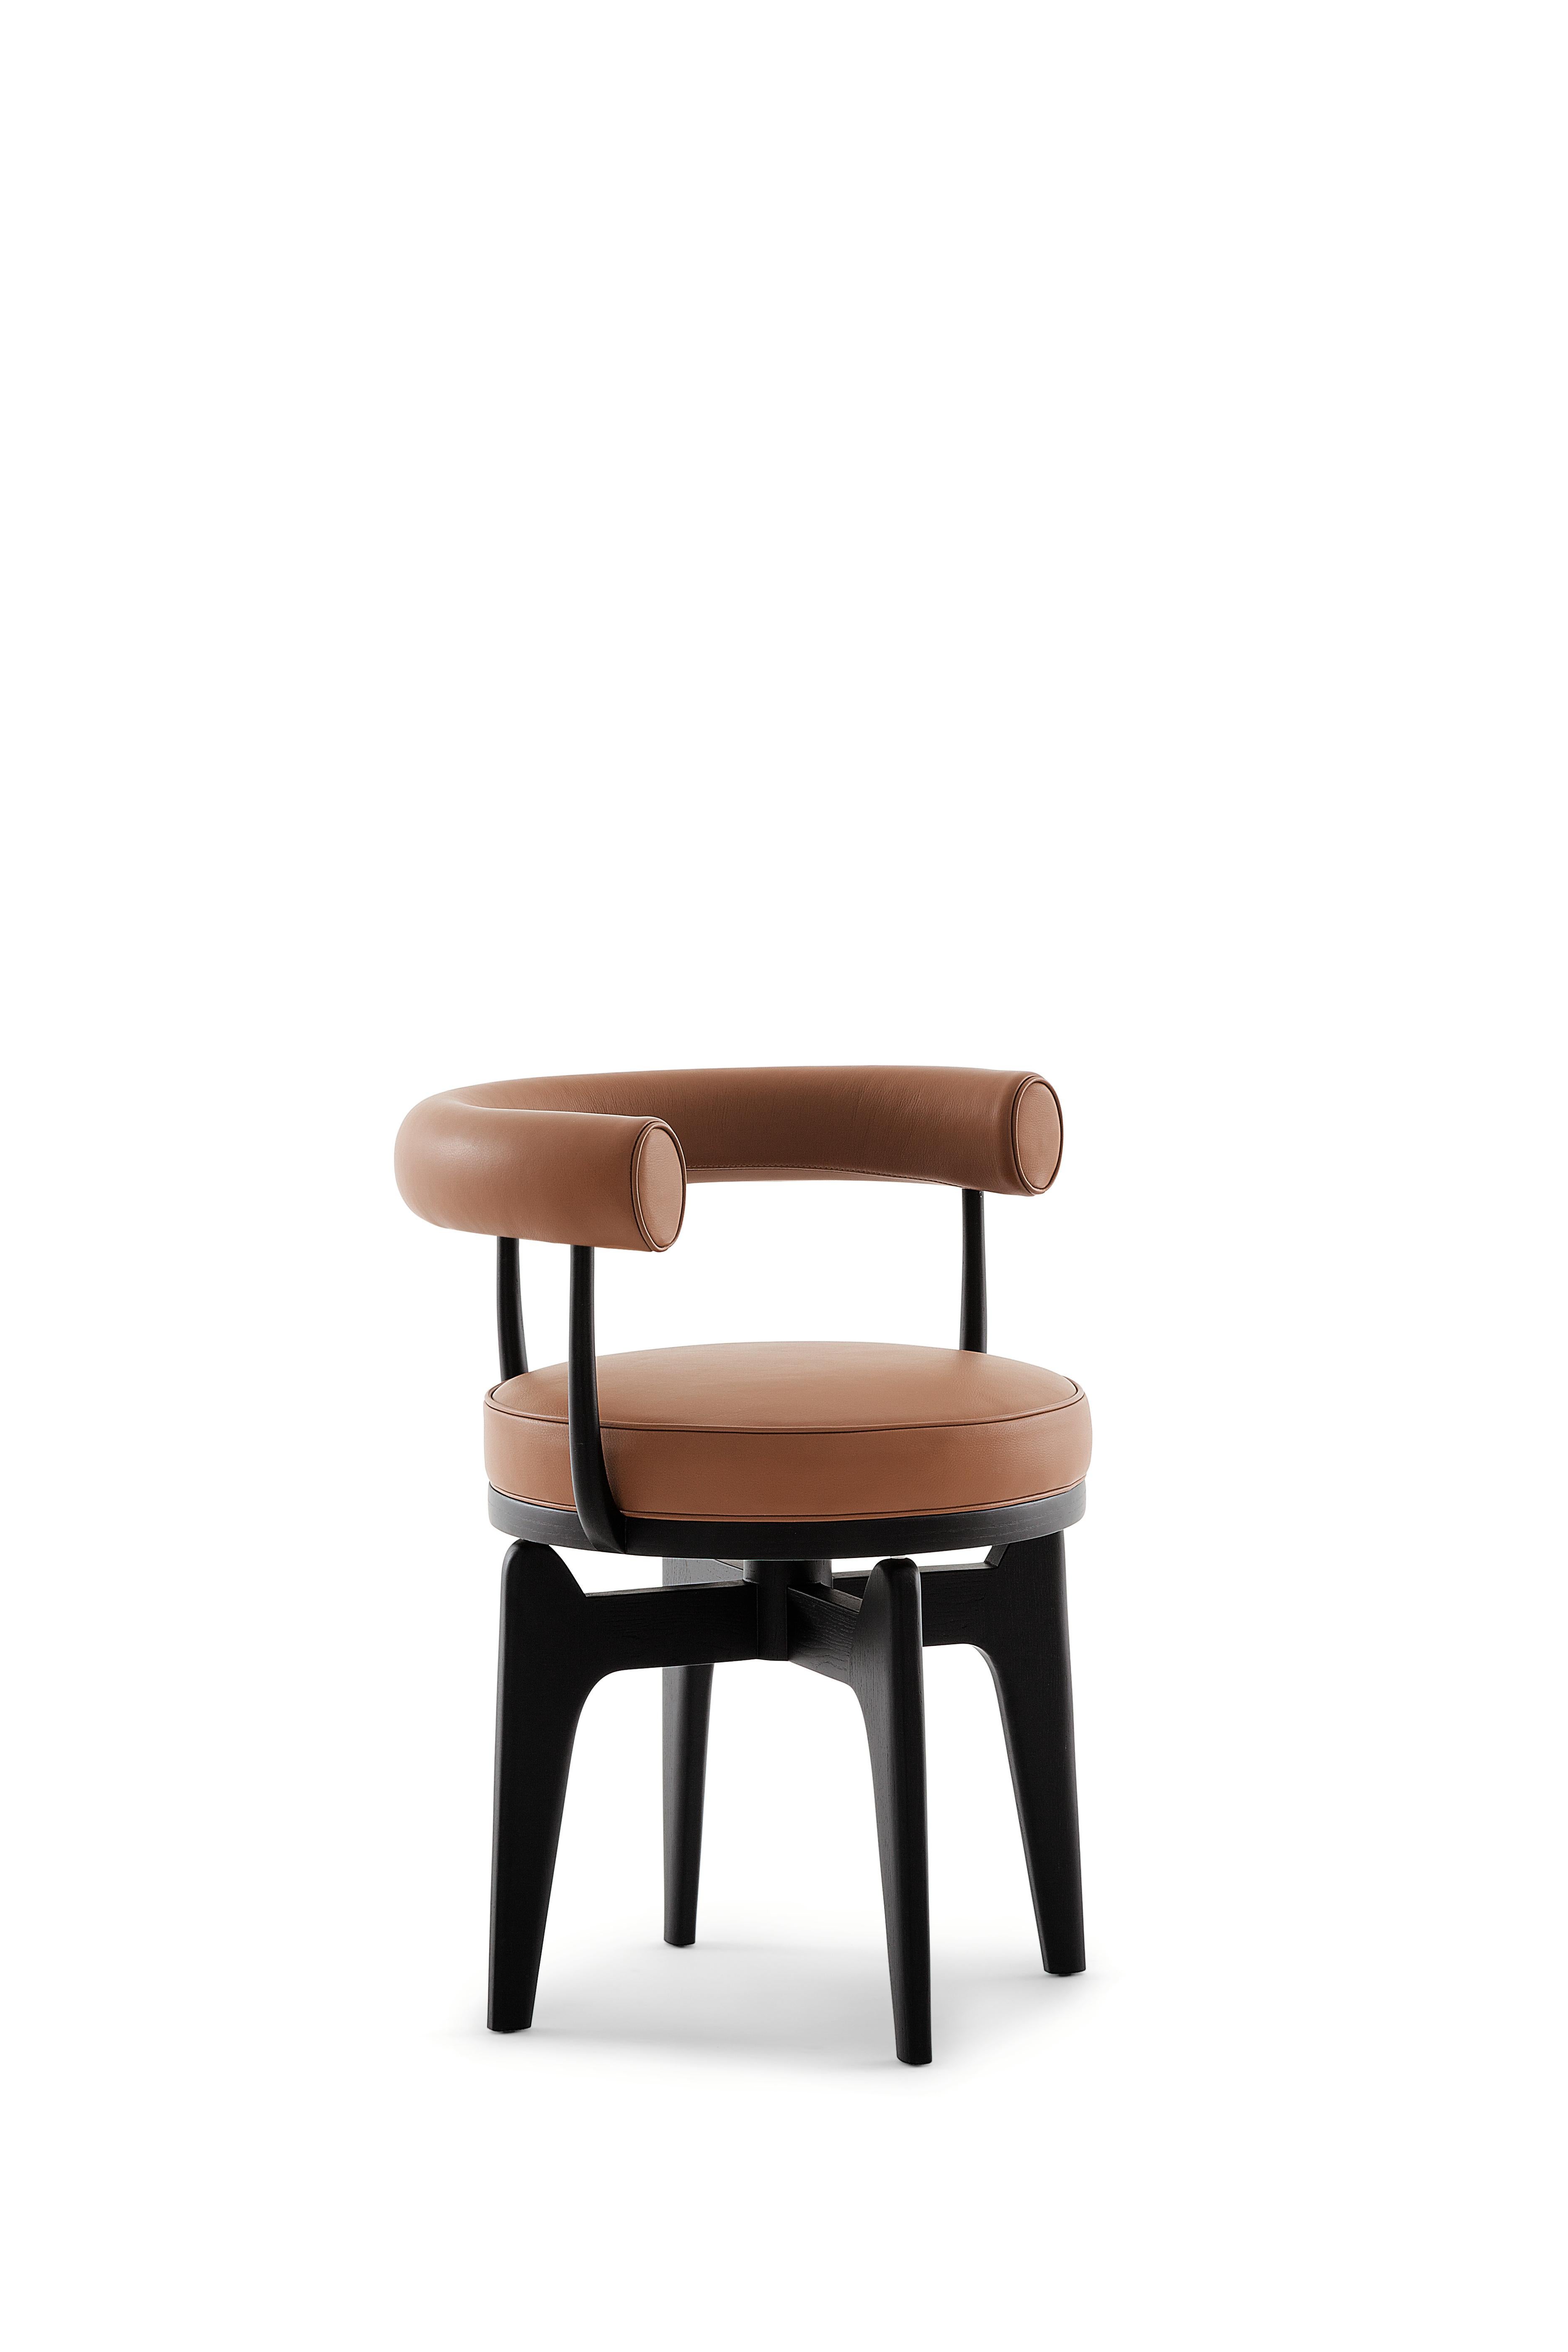 Contemporary Charlotte Perriand Indochine Armchair  For Sale